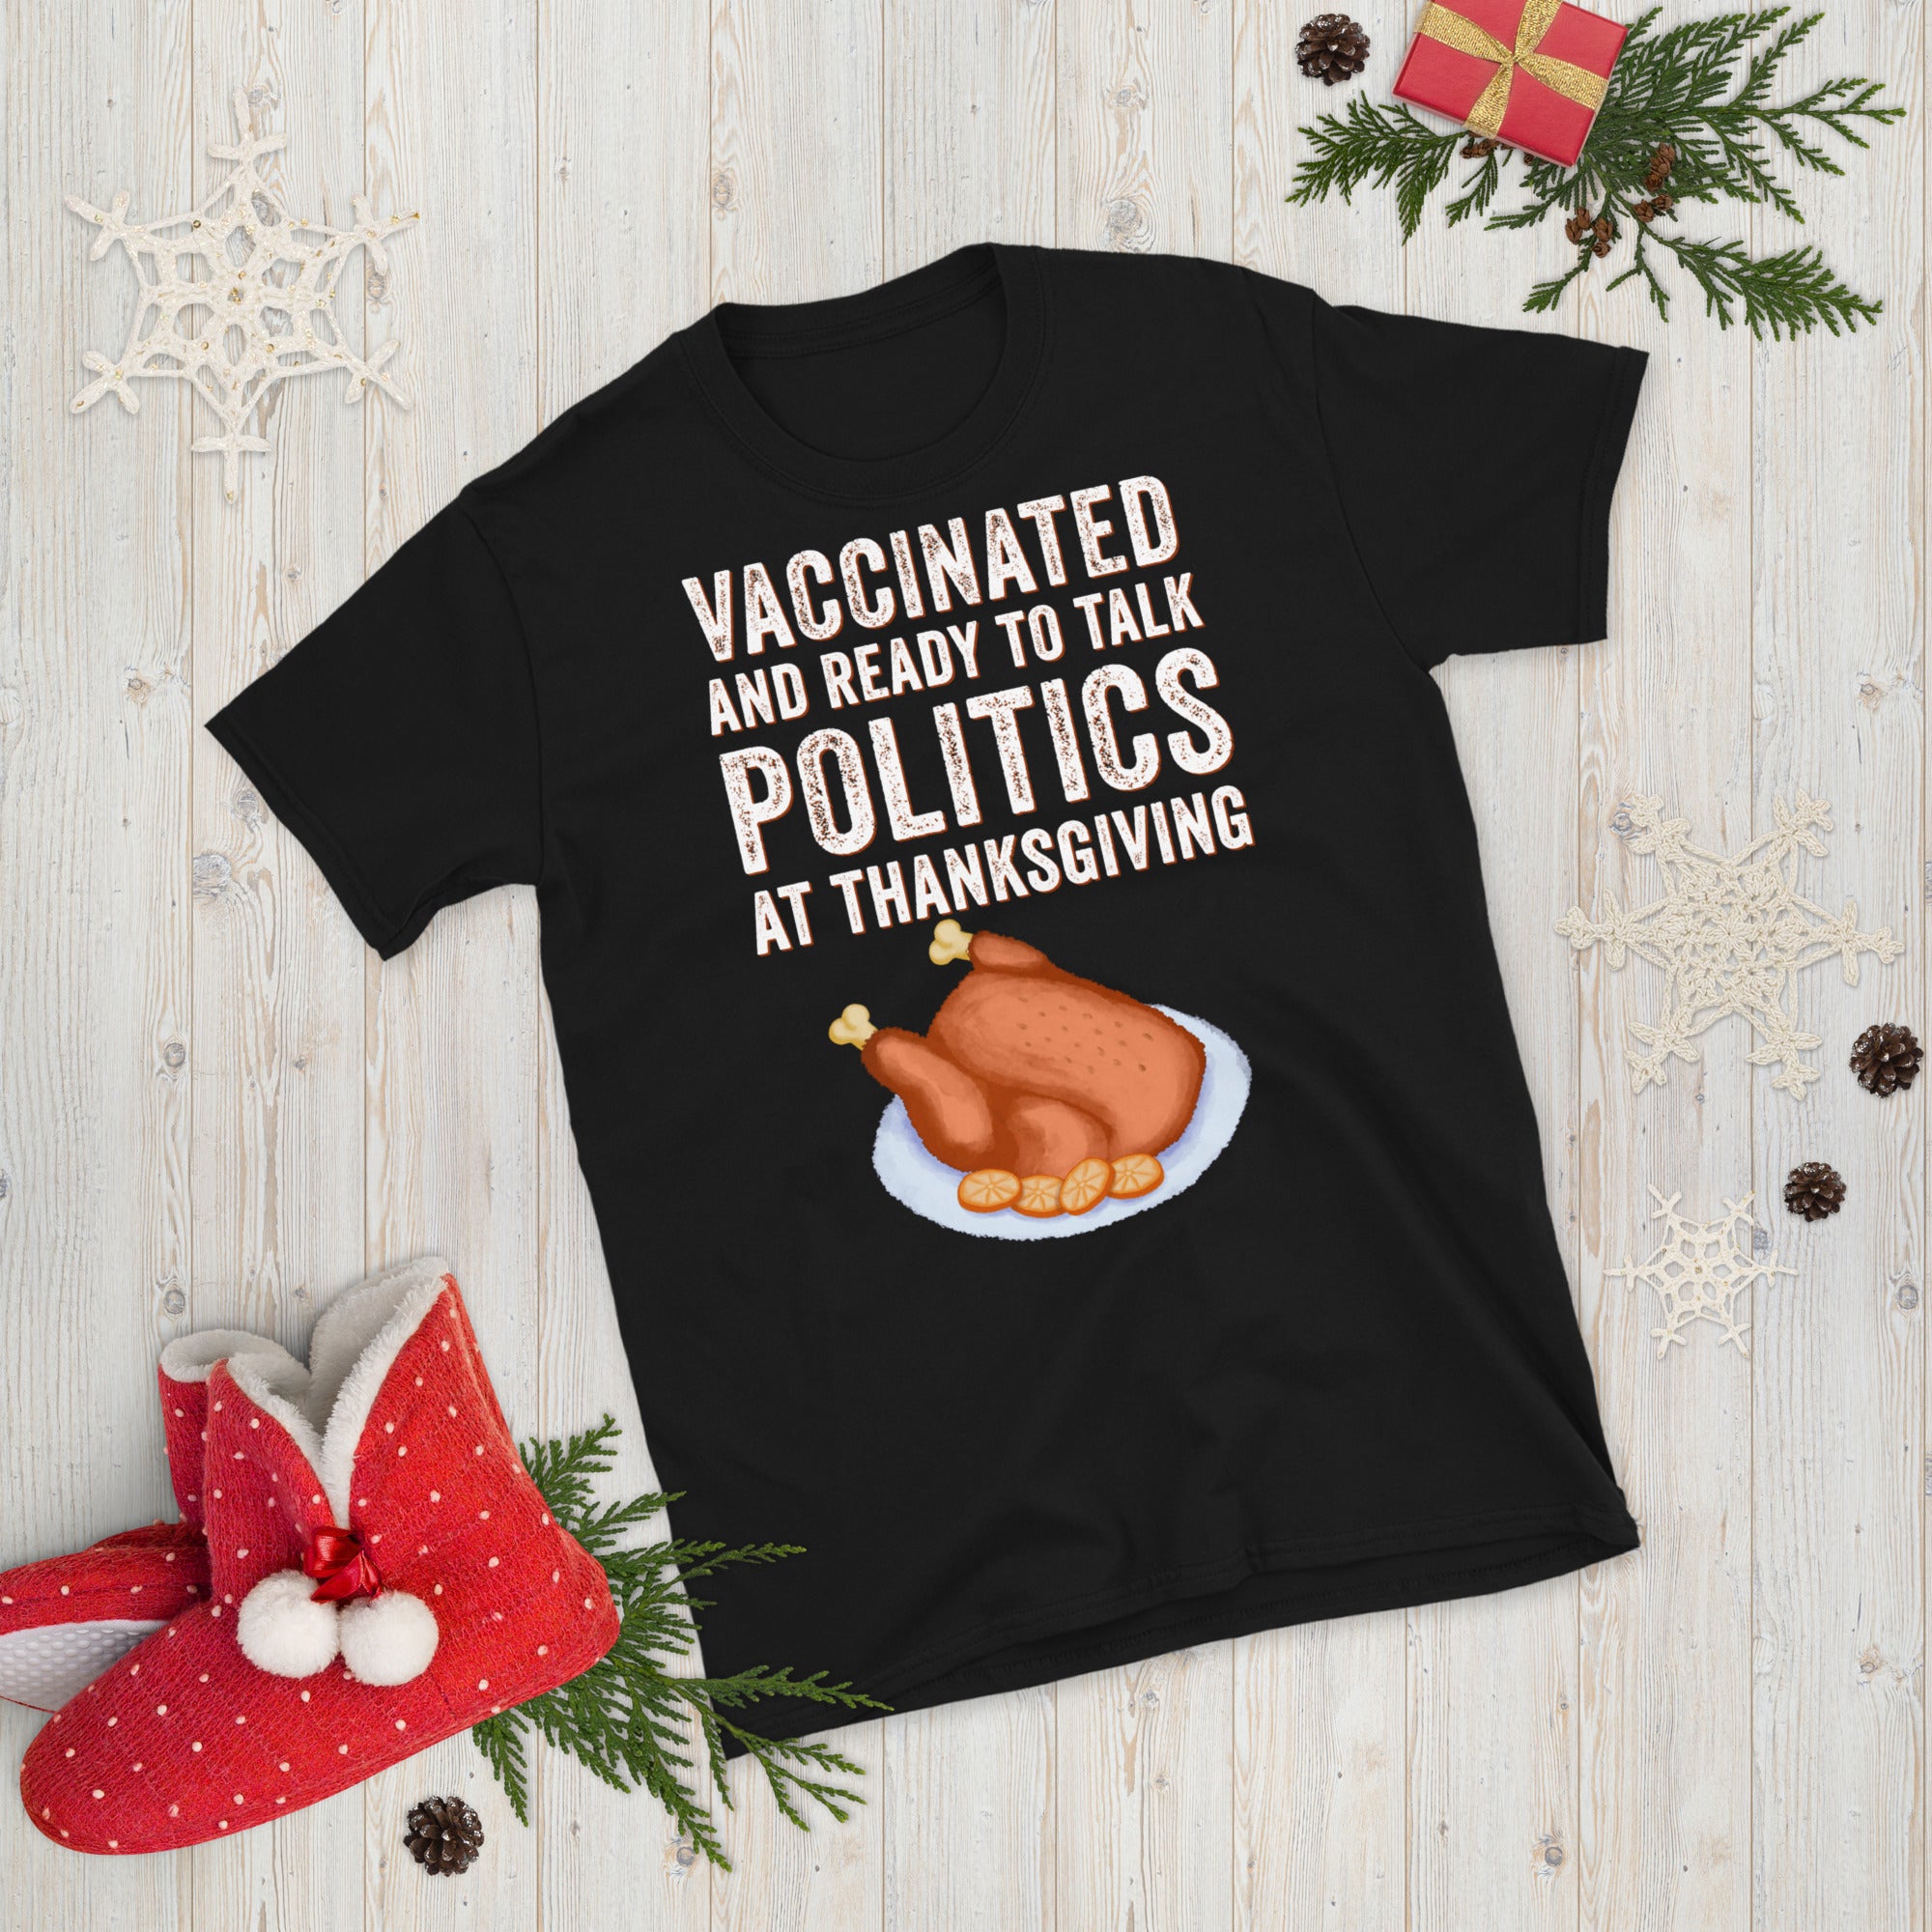 Vaccinated And Ready To Talk Politics At Thanksgiving Shirt, Thanksgiving Turkey Shirt, Thanksgiving Family Shirts, Funny Thanksgiving Shirt - Madeinsea©